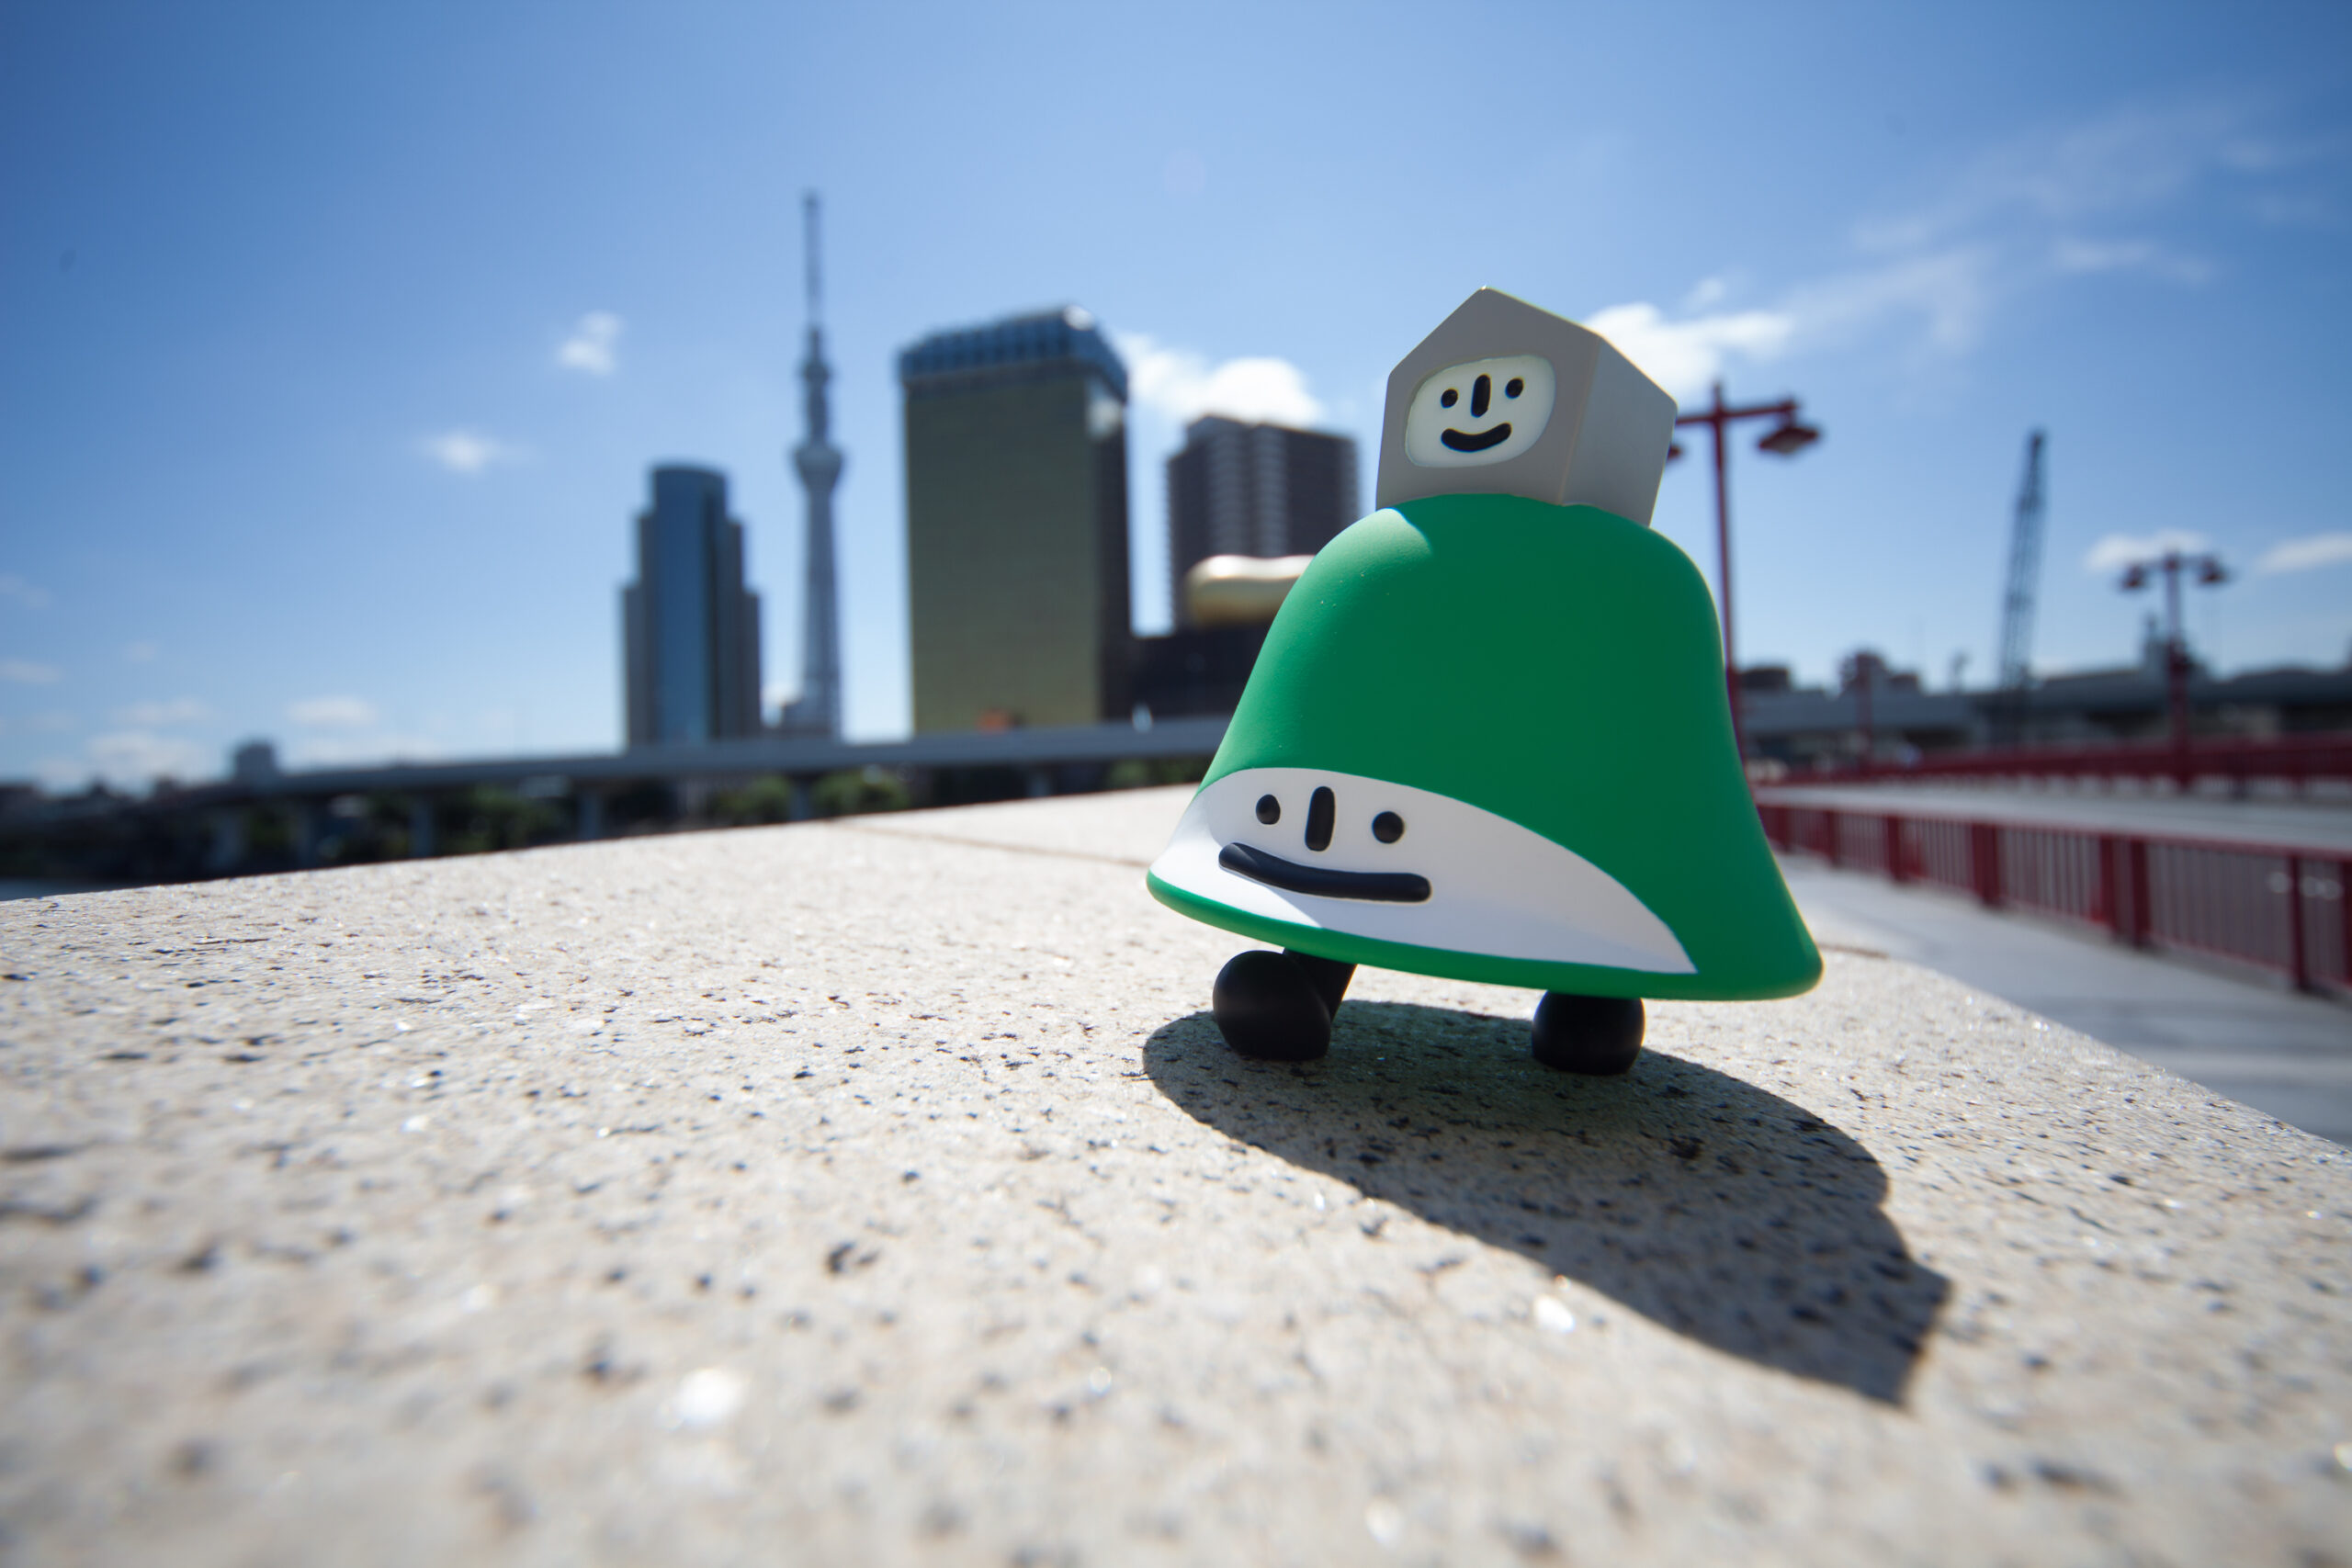 Lawhill vinyl figure in Tokyo (2012) photo by issekinicho.fr